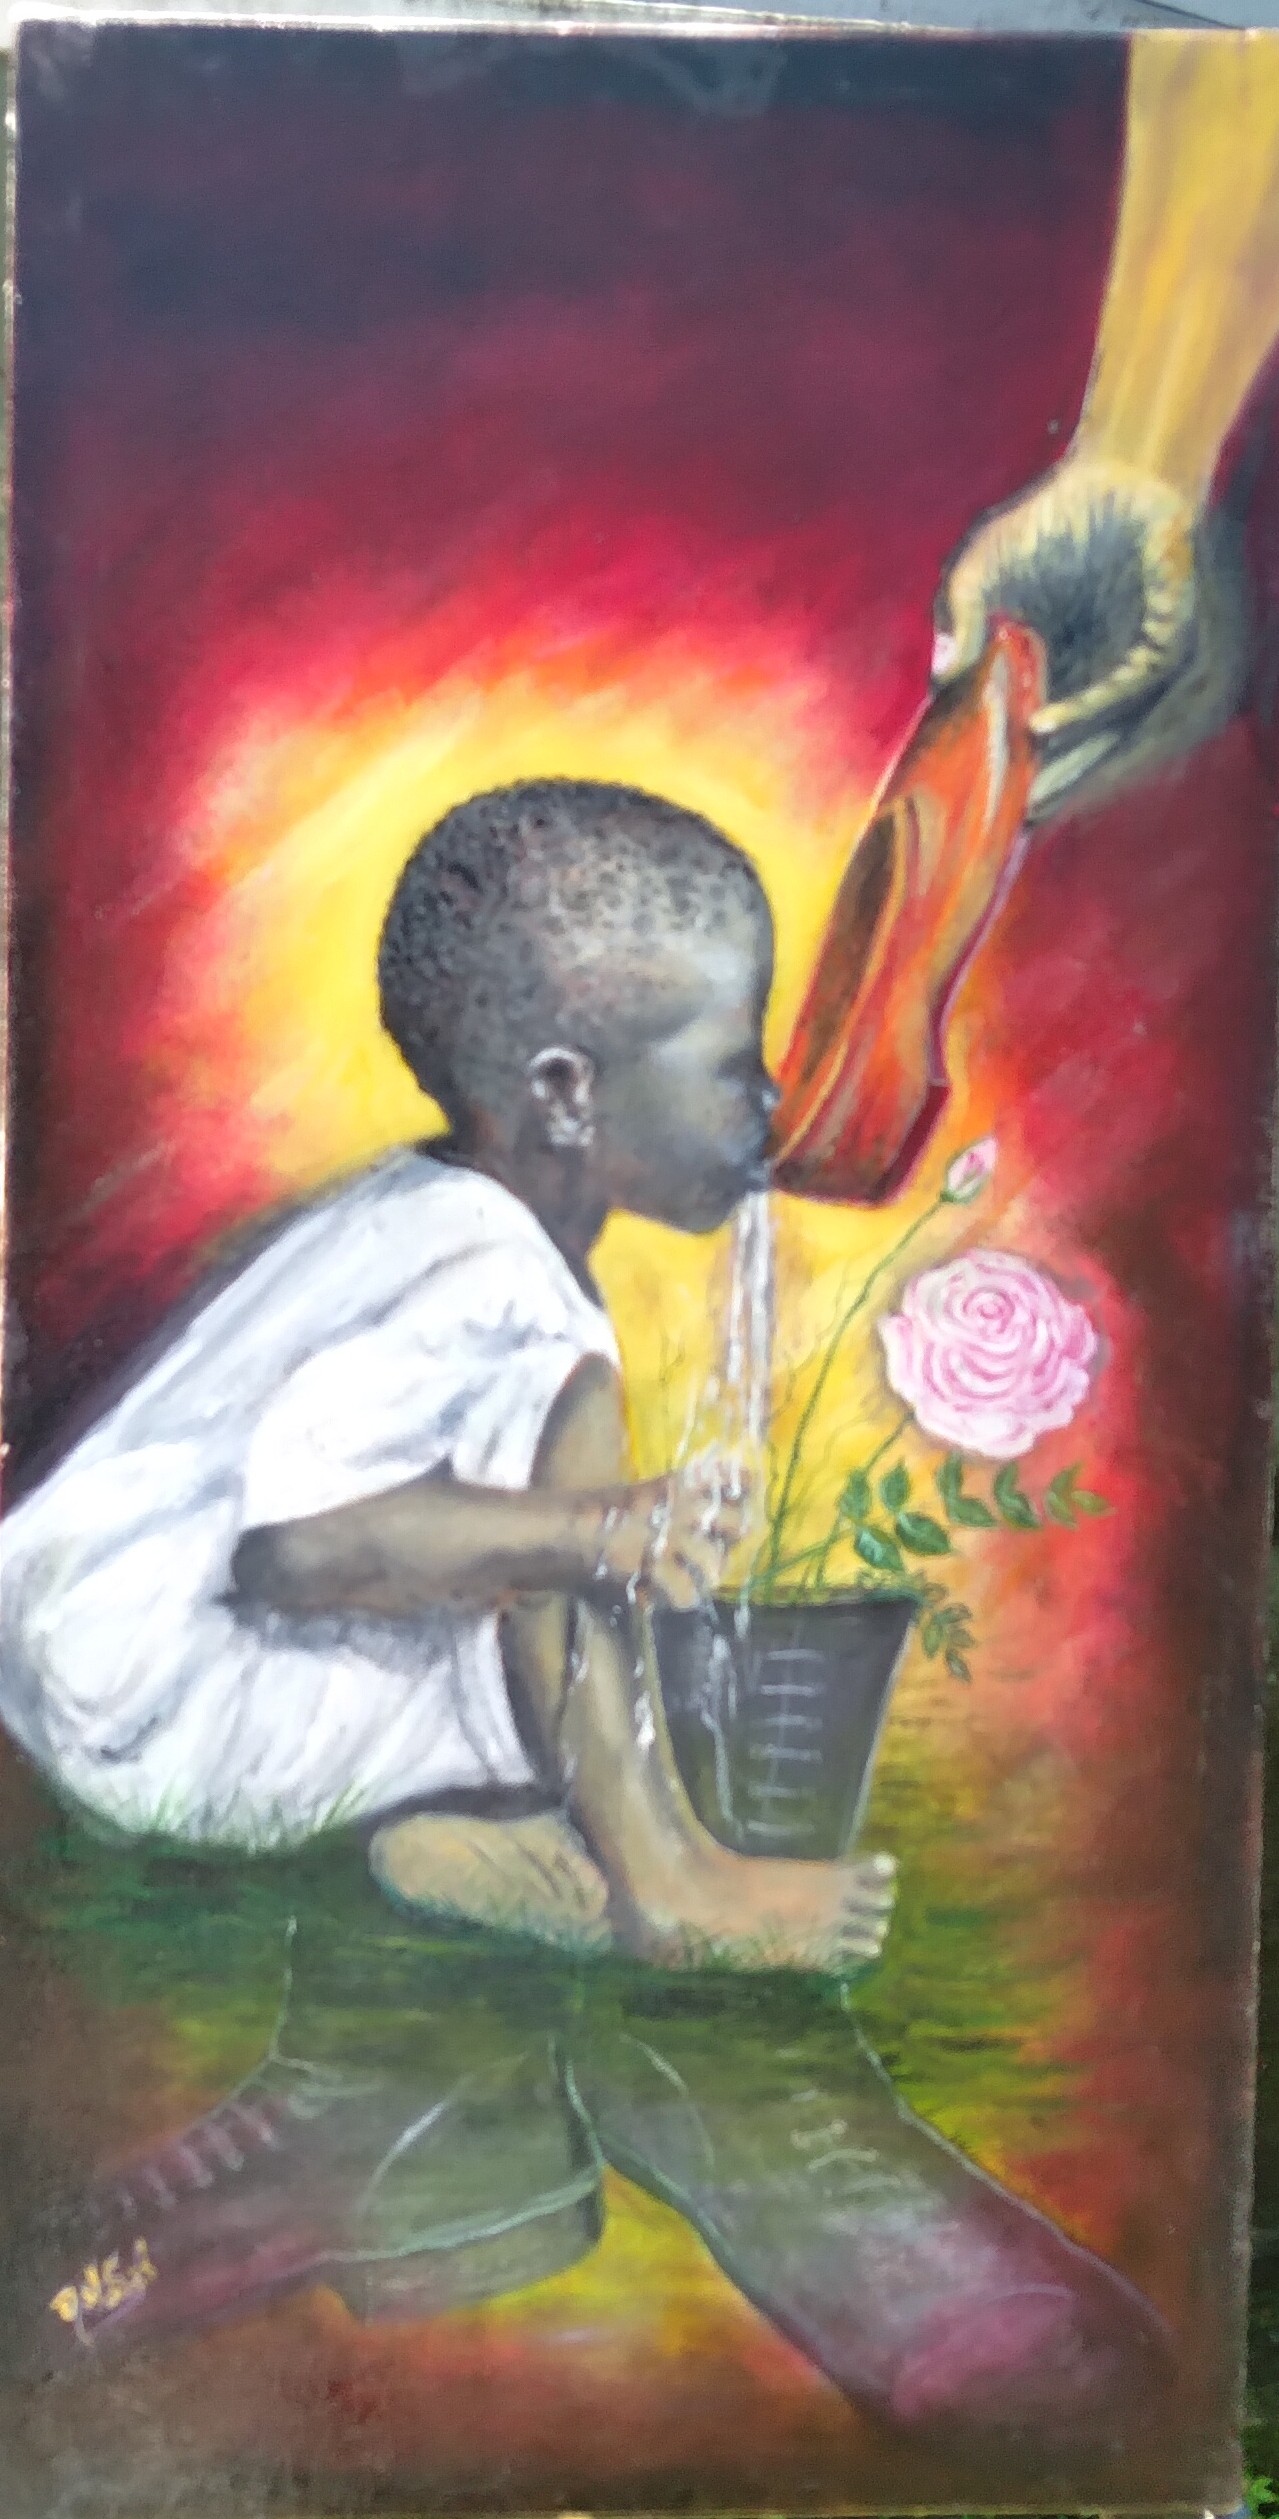 African child by W. Oliver Mendis